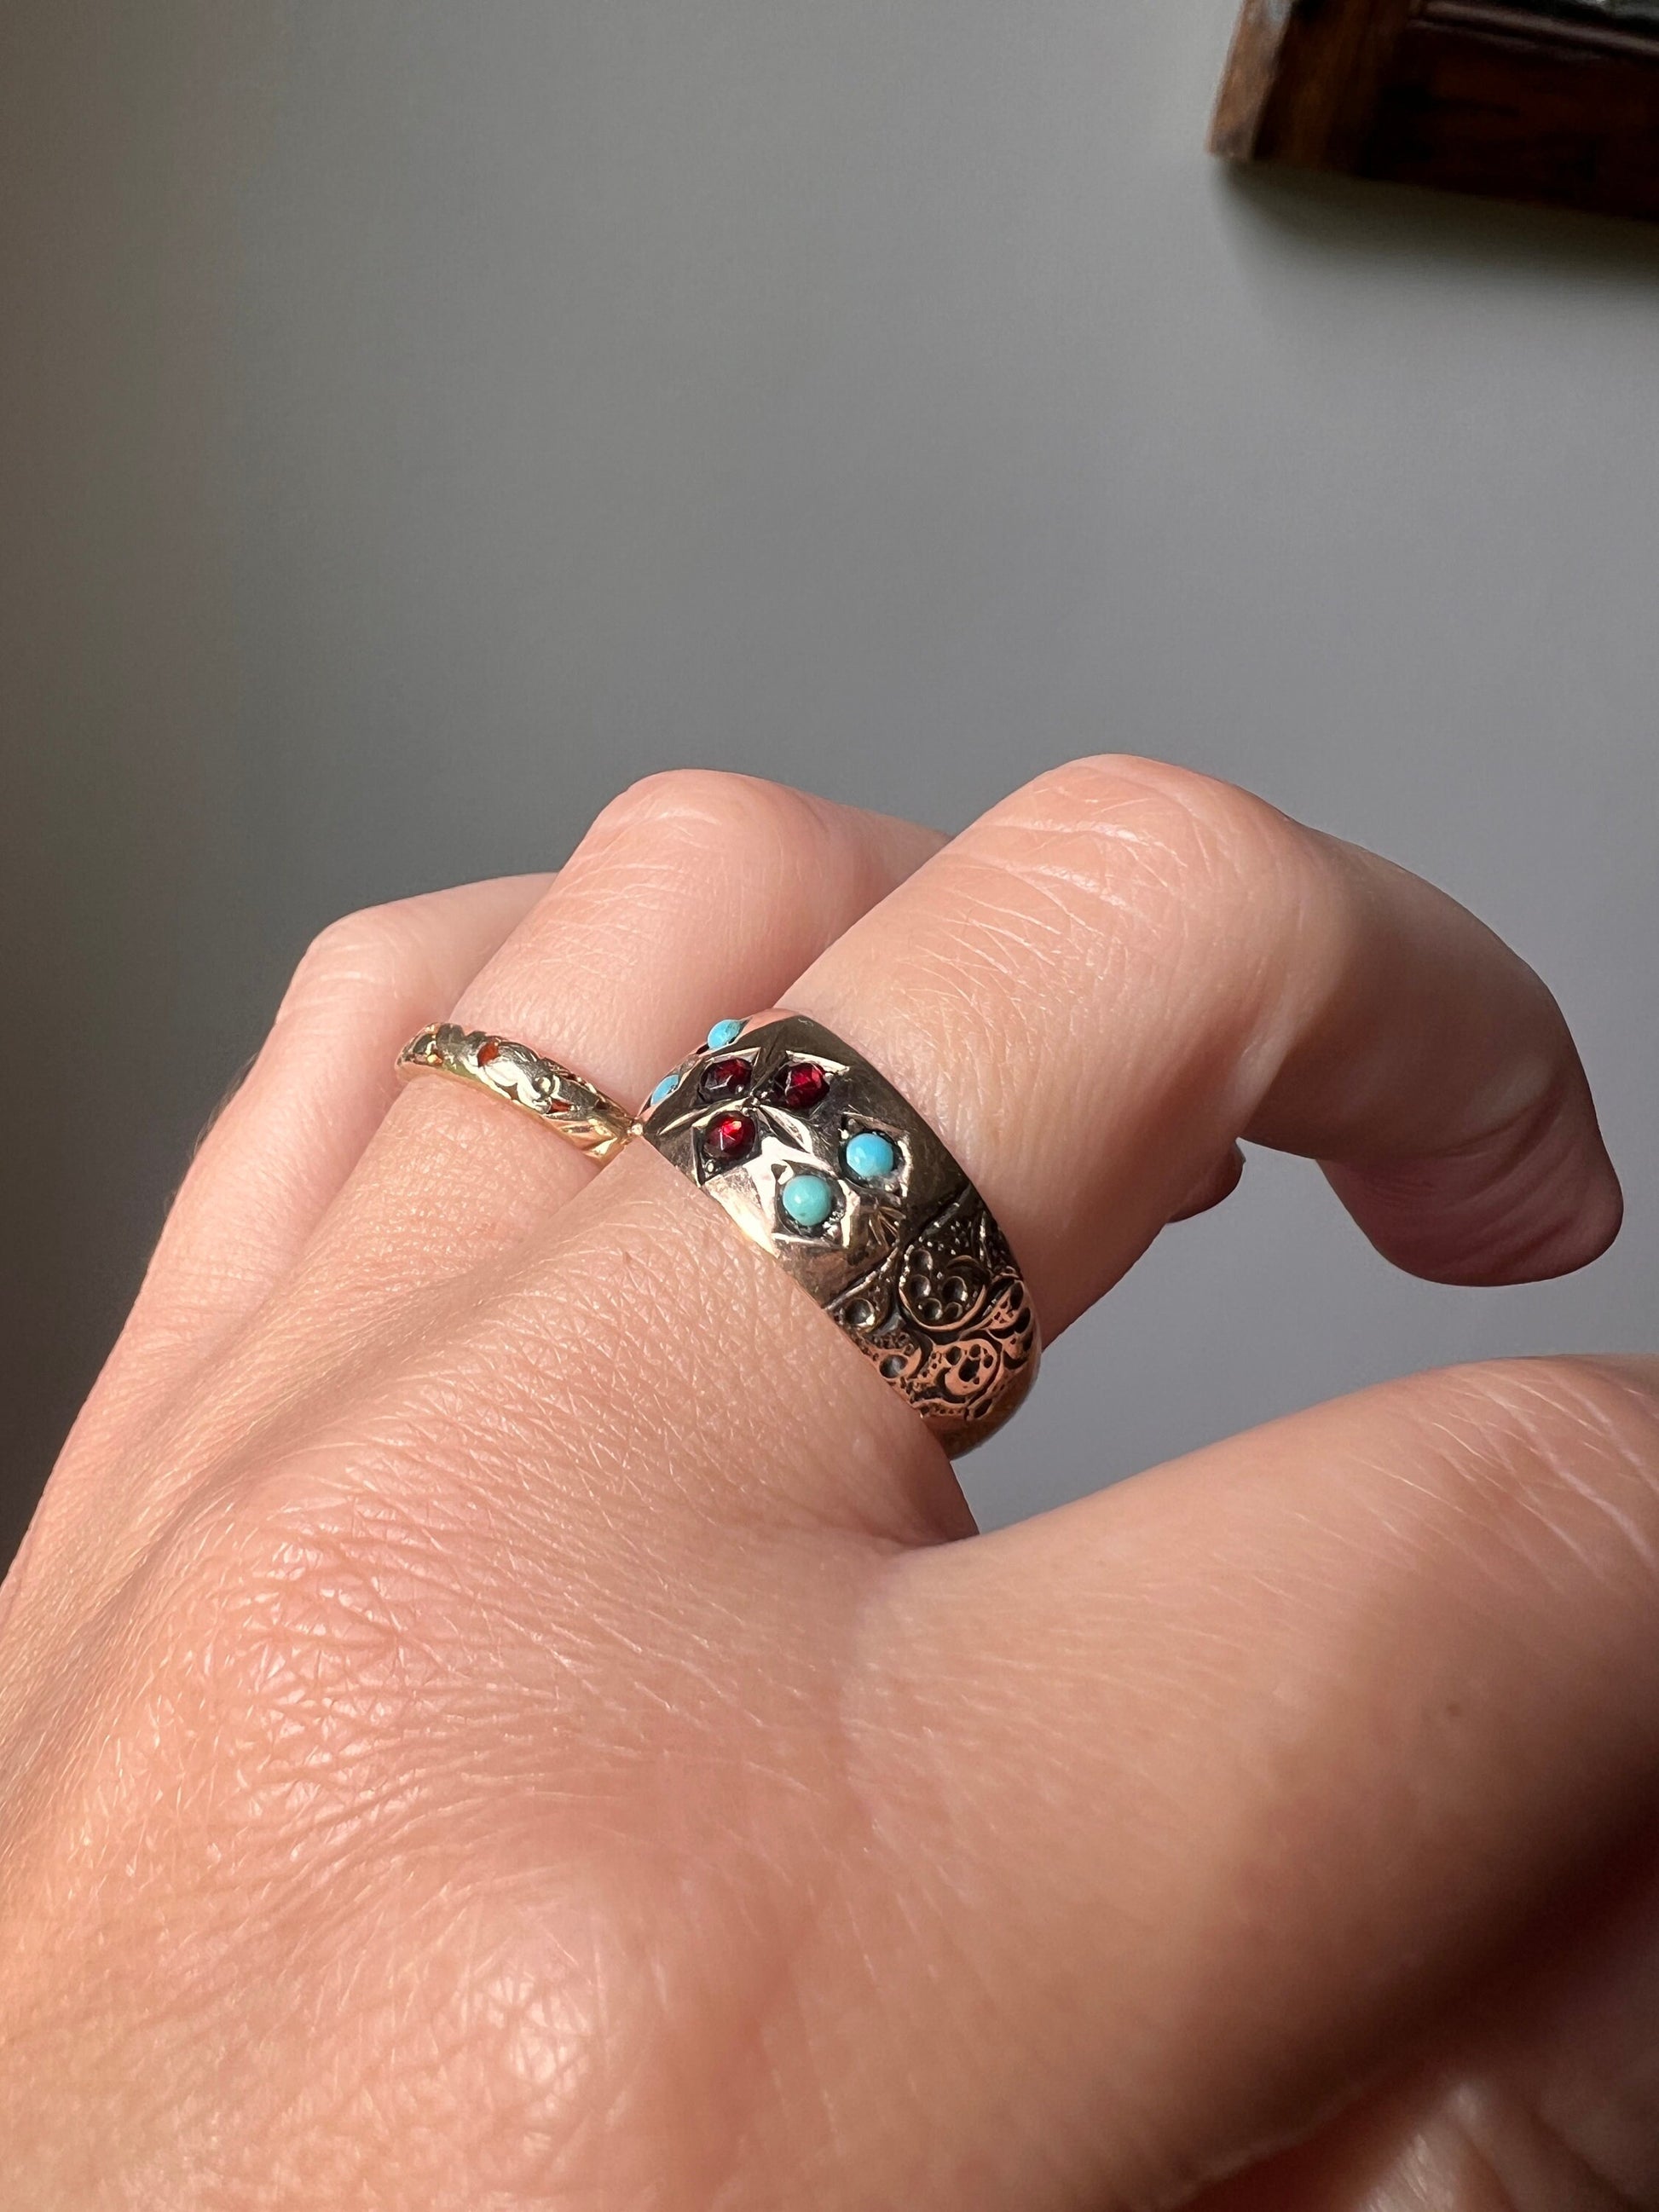 Rose Cut GARNET Turquoise Ornate Wide Band Stacker Ring 10k Rose Gold Victorian Wedding Swirl Shoulders Romantic Gift Blue Red Floral Clover